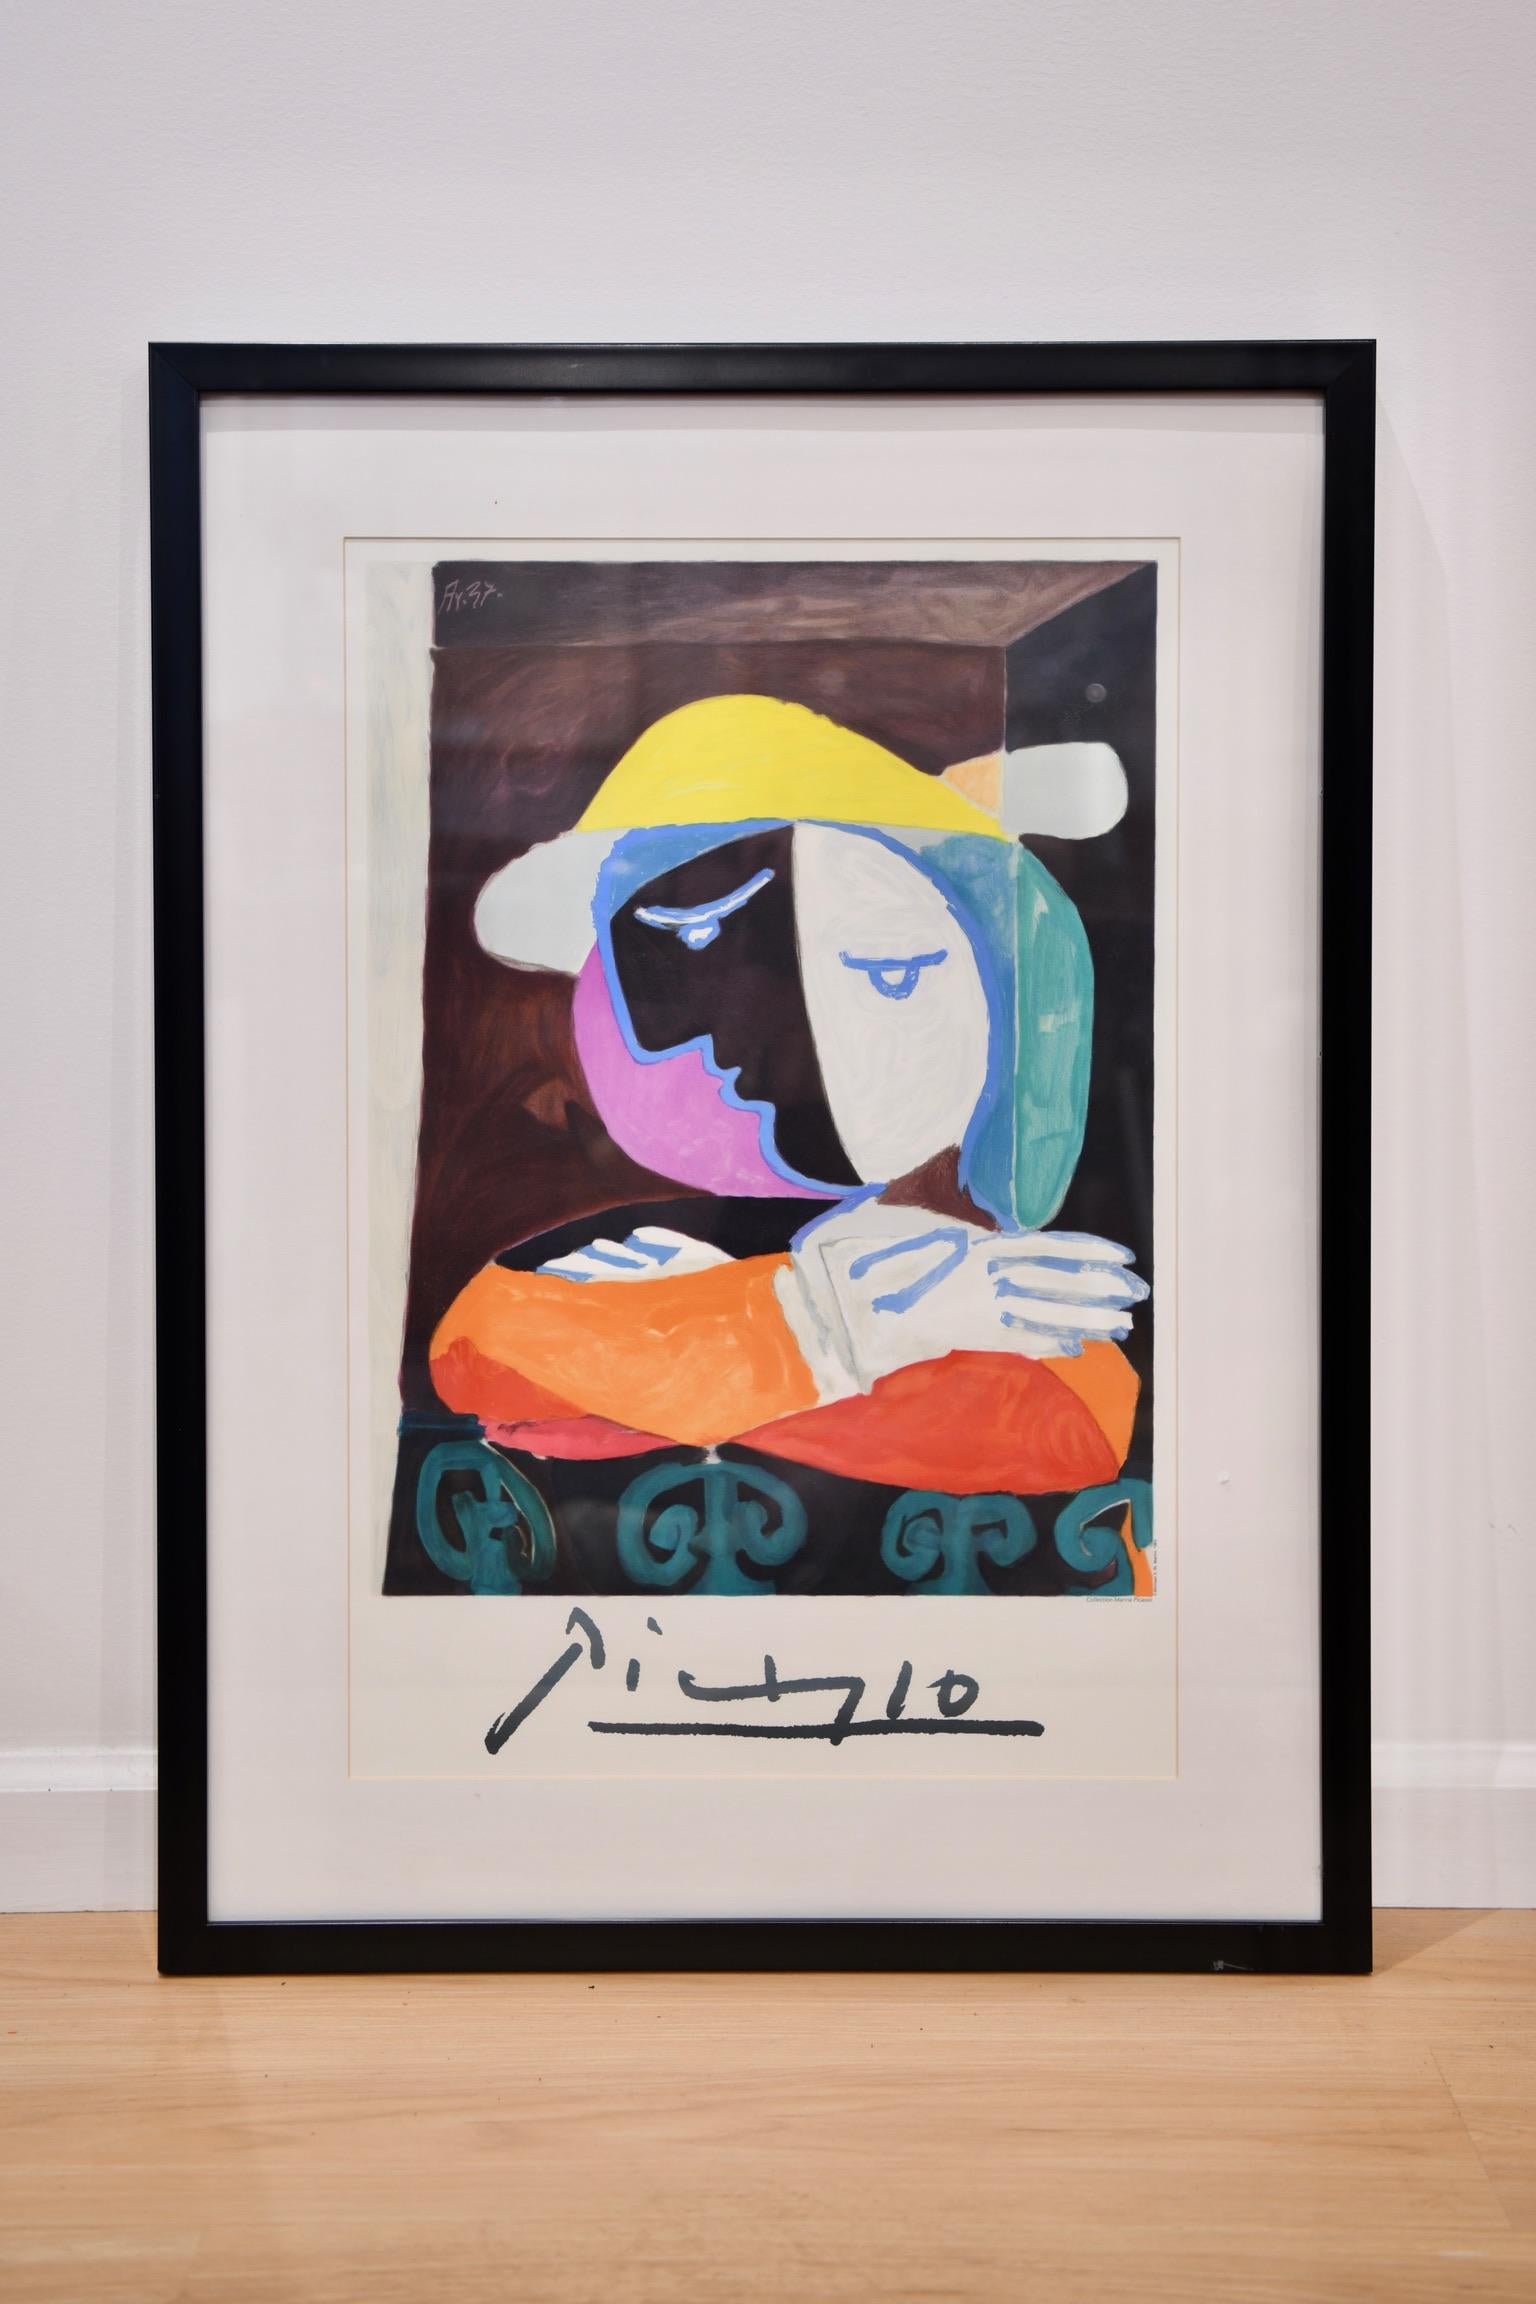 Limited edition stone lithograph on paper printed in 1983 by Marcel Salinas with permission of Marina Picasso, titled 